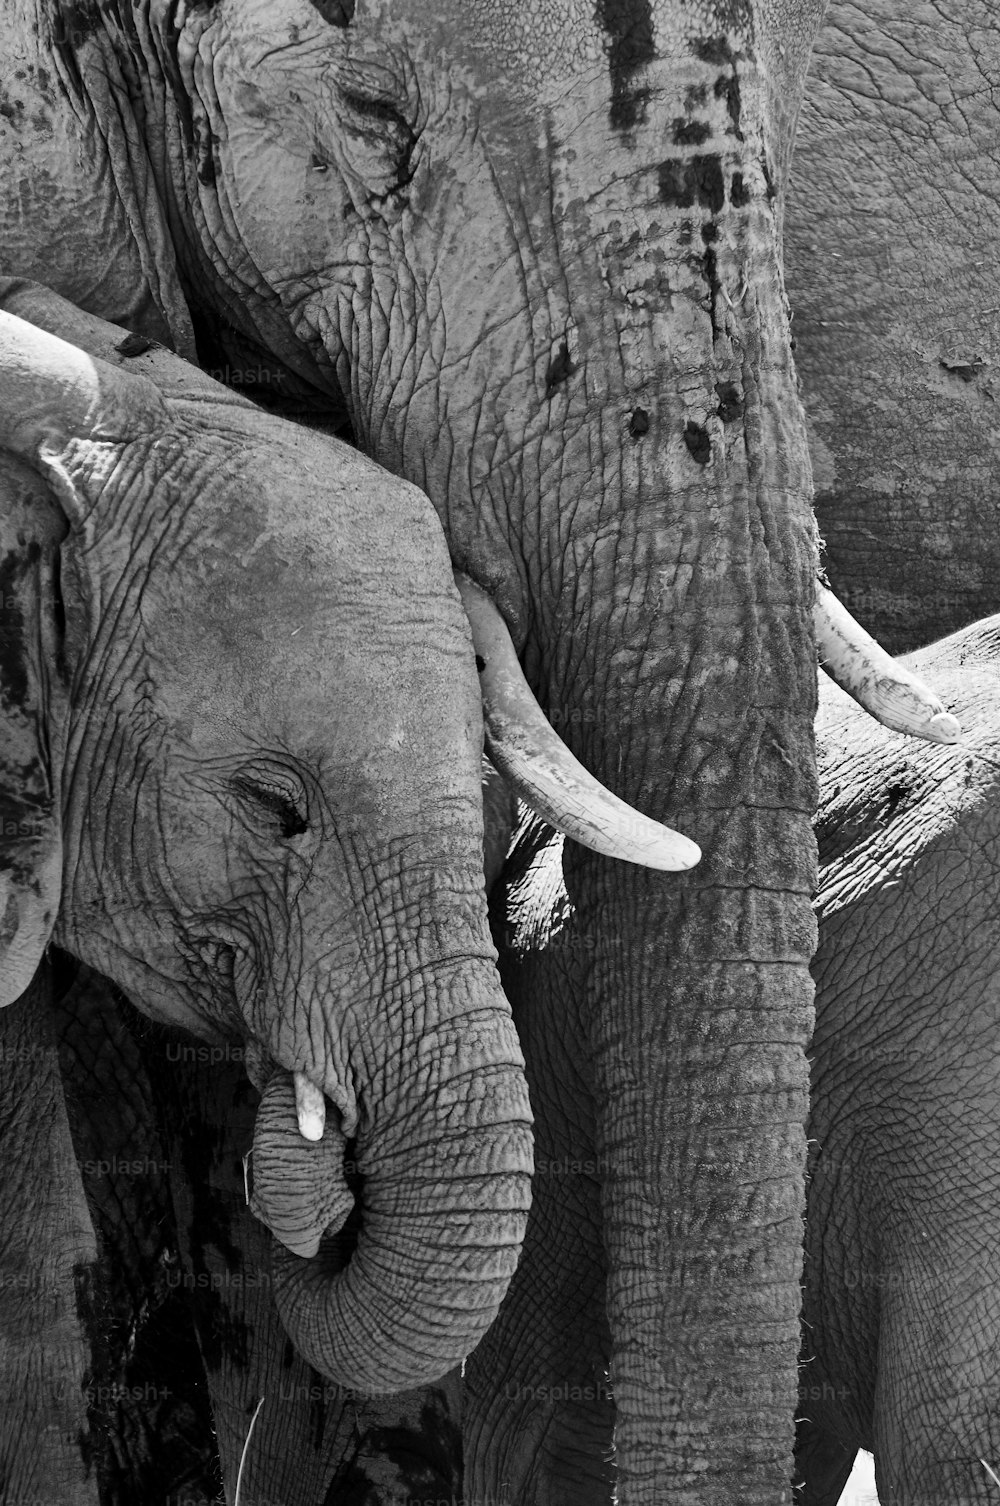 Portrait of a baby elephant that takes his trunk in mouth photographed with his mom